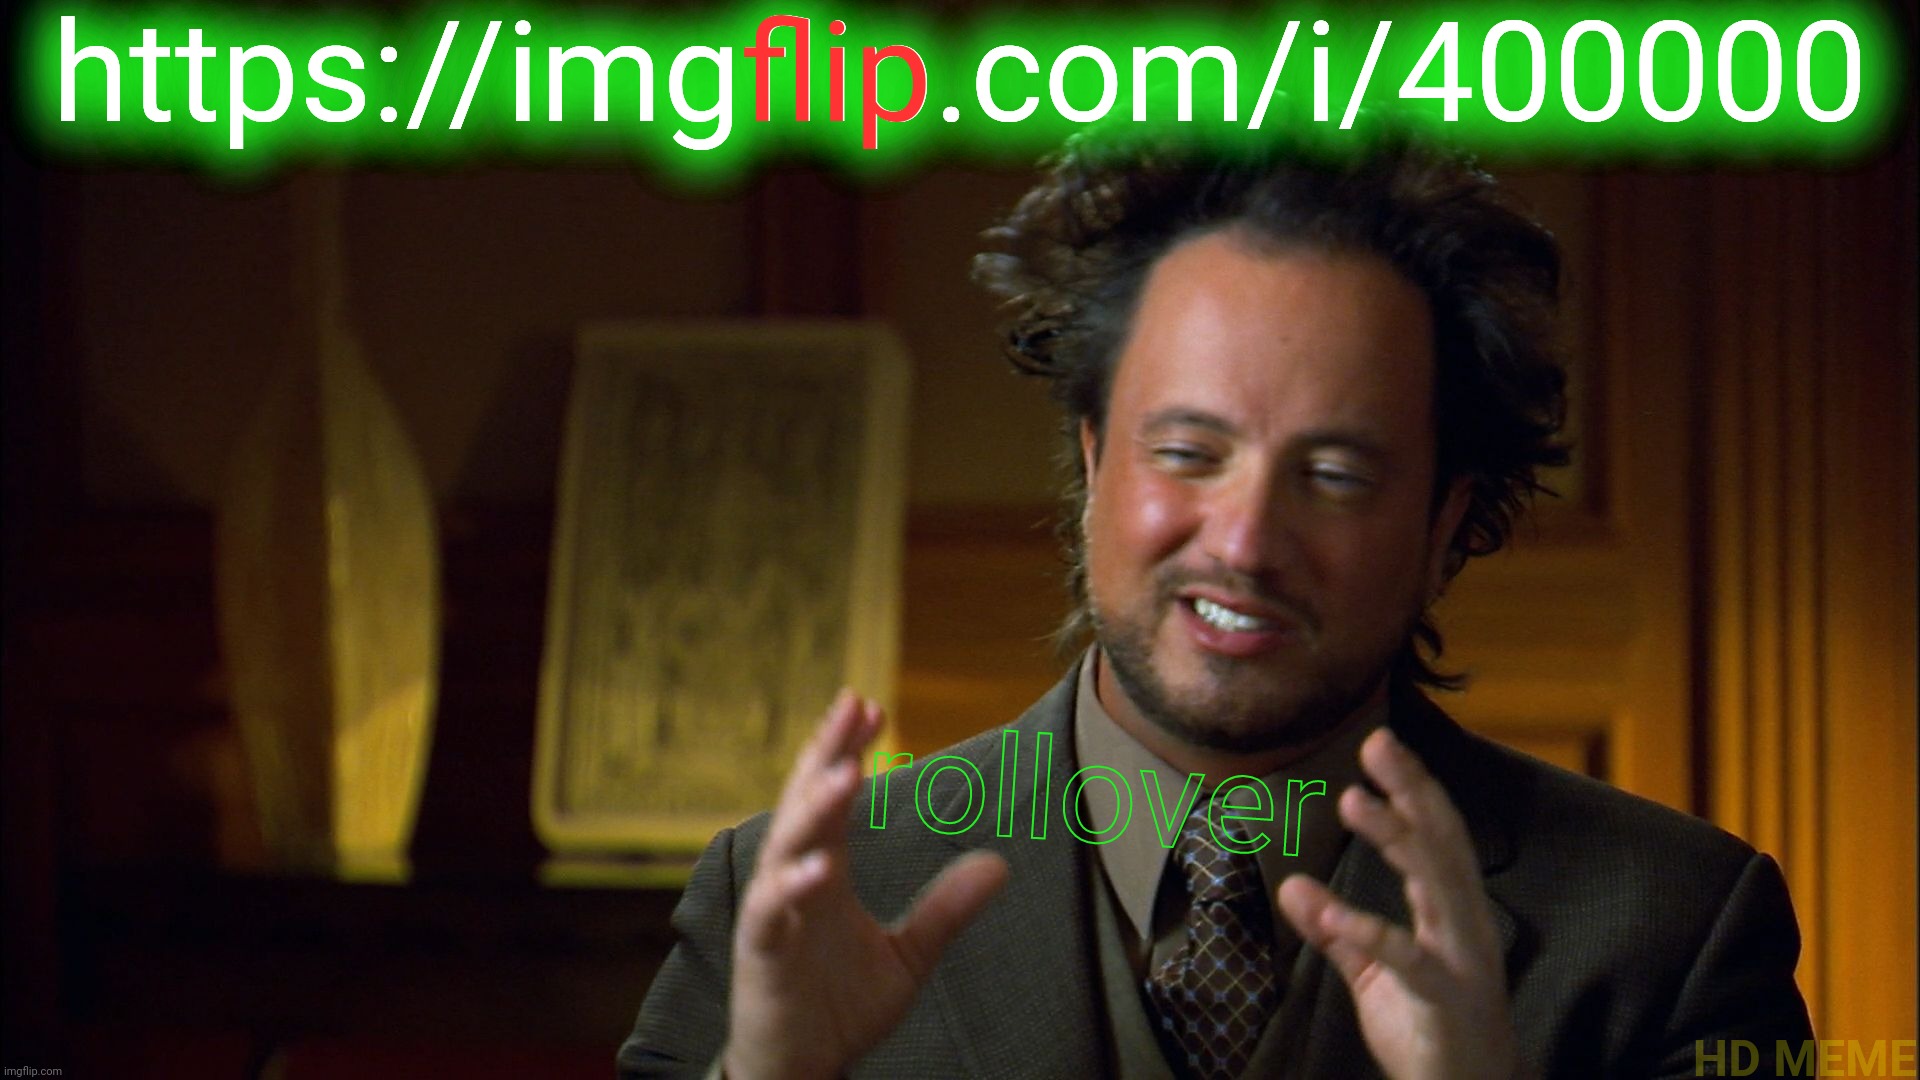 ancient aliens clowns | https://imgflip.com/i/400000; flip; rollover; HD MEME | image tagged in ancient aliens clowns | made w/ Imgflip meme maker